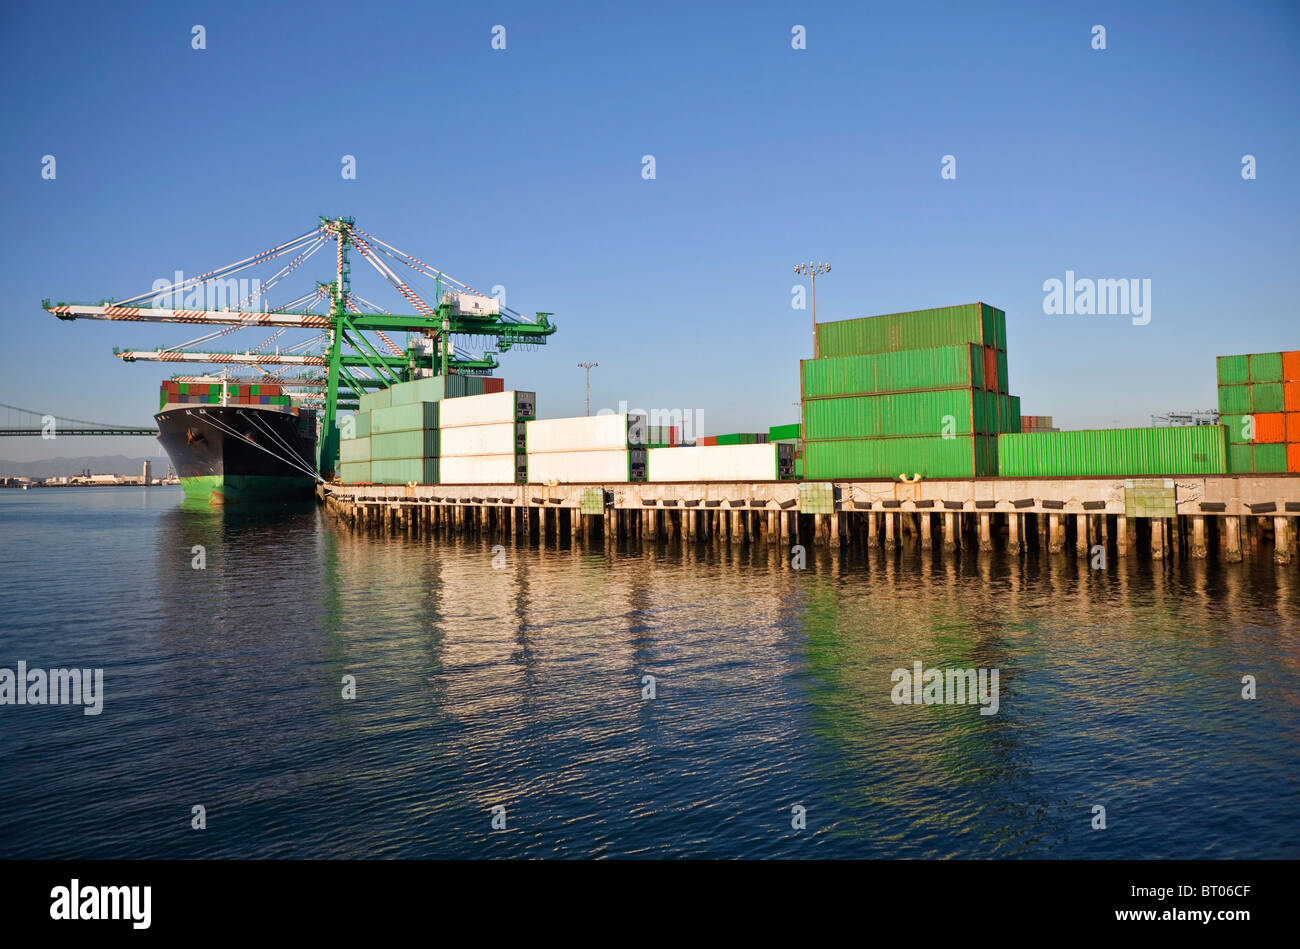 Containers, cranes and ship in warm afternoon light. Stock Photo